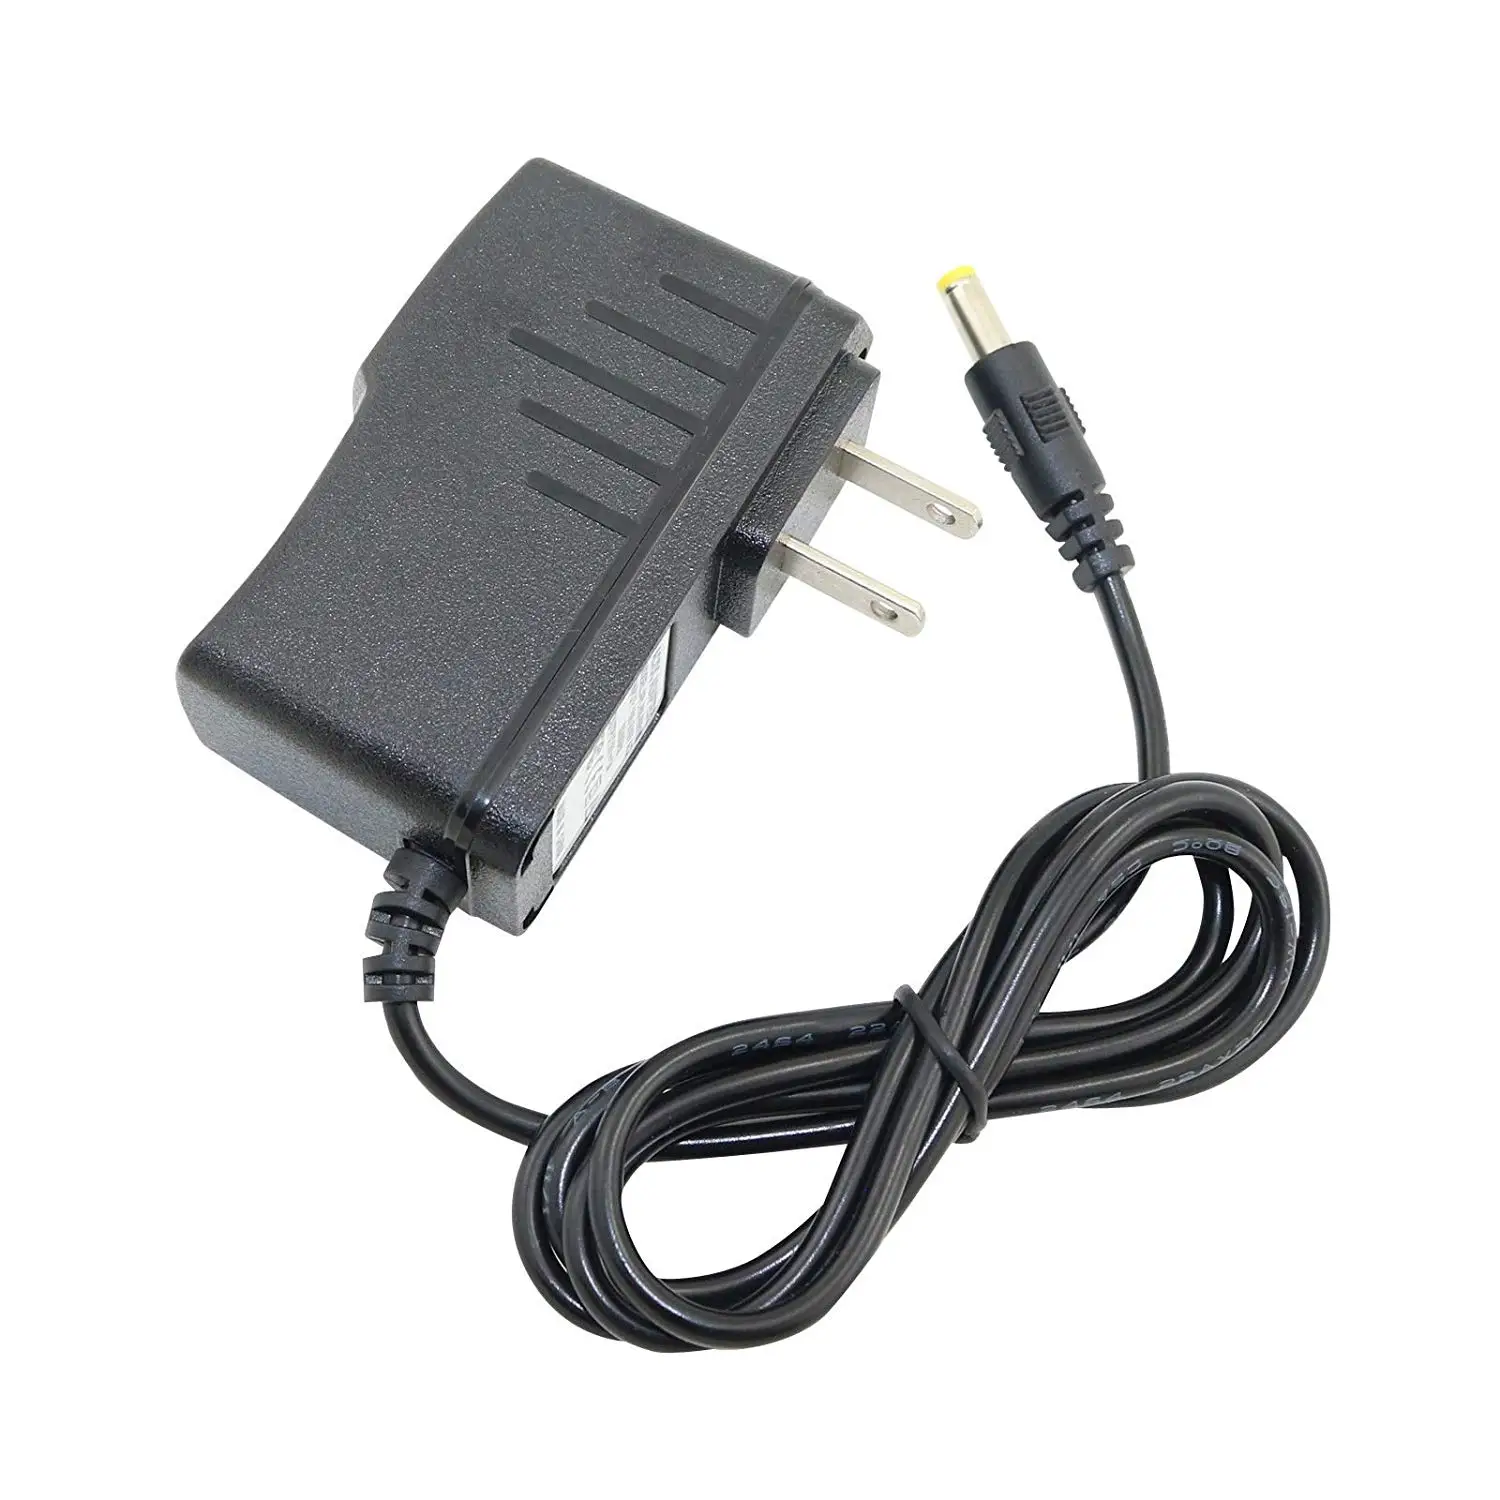 AC Adapter Charger for Radio Shack PRO-164 Radio Trunking Scanner Power Supply